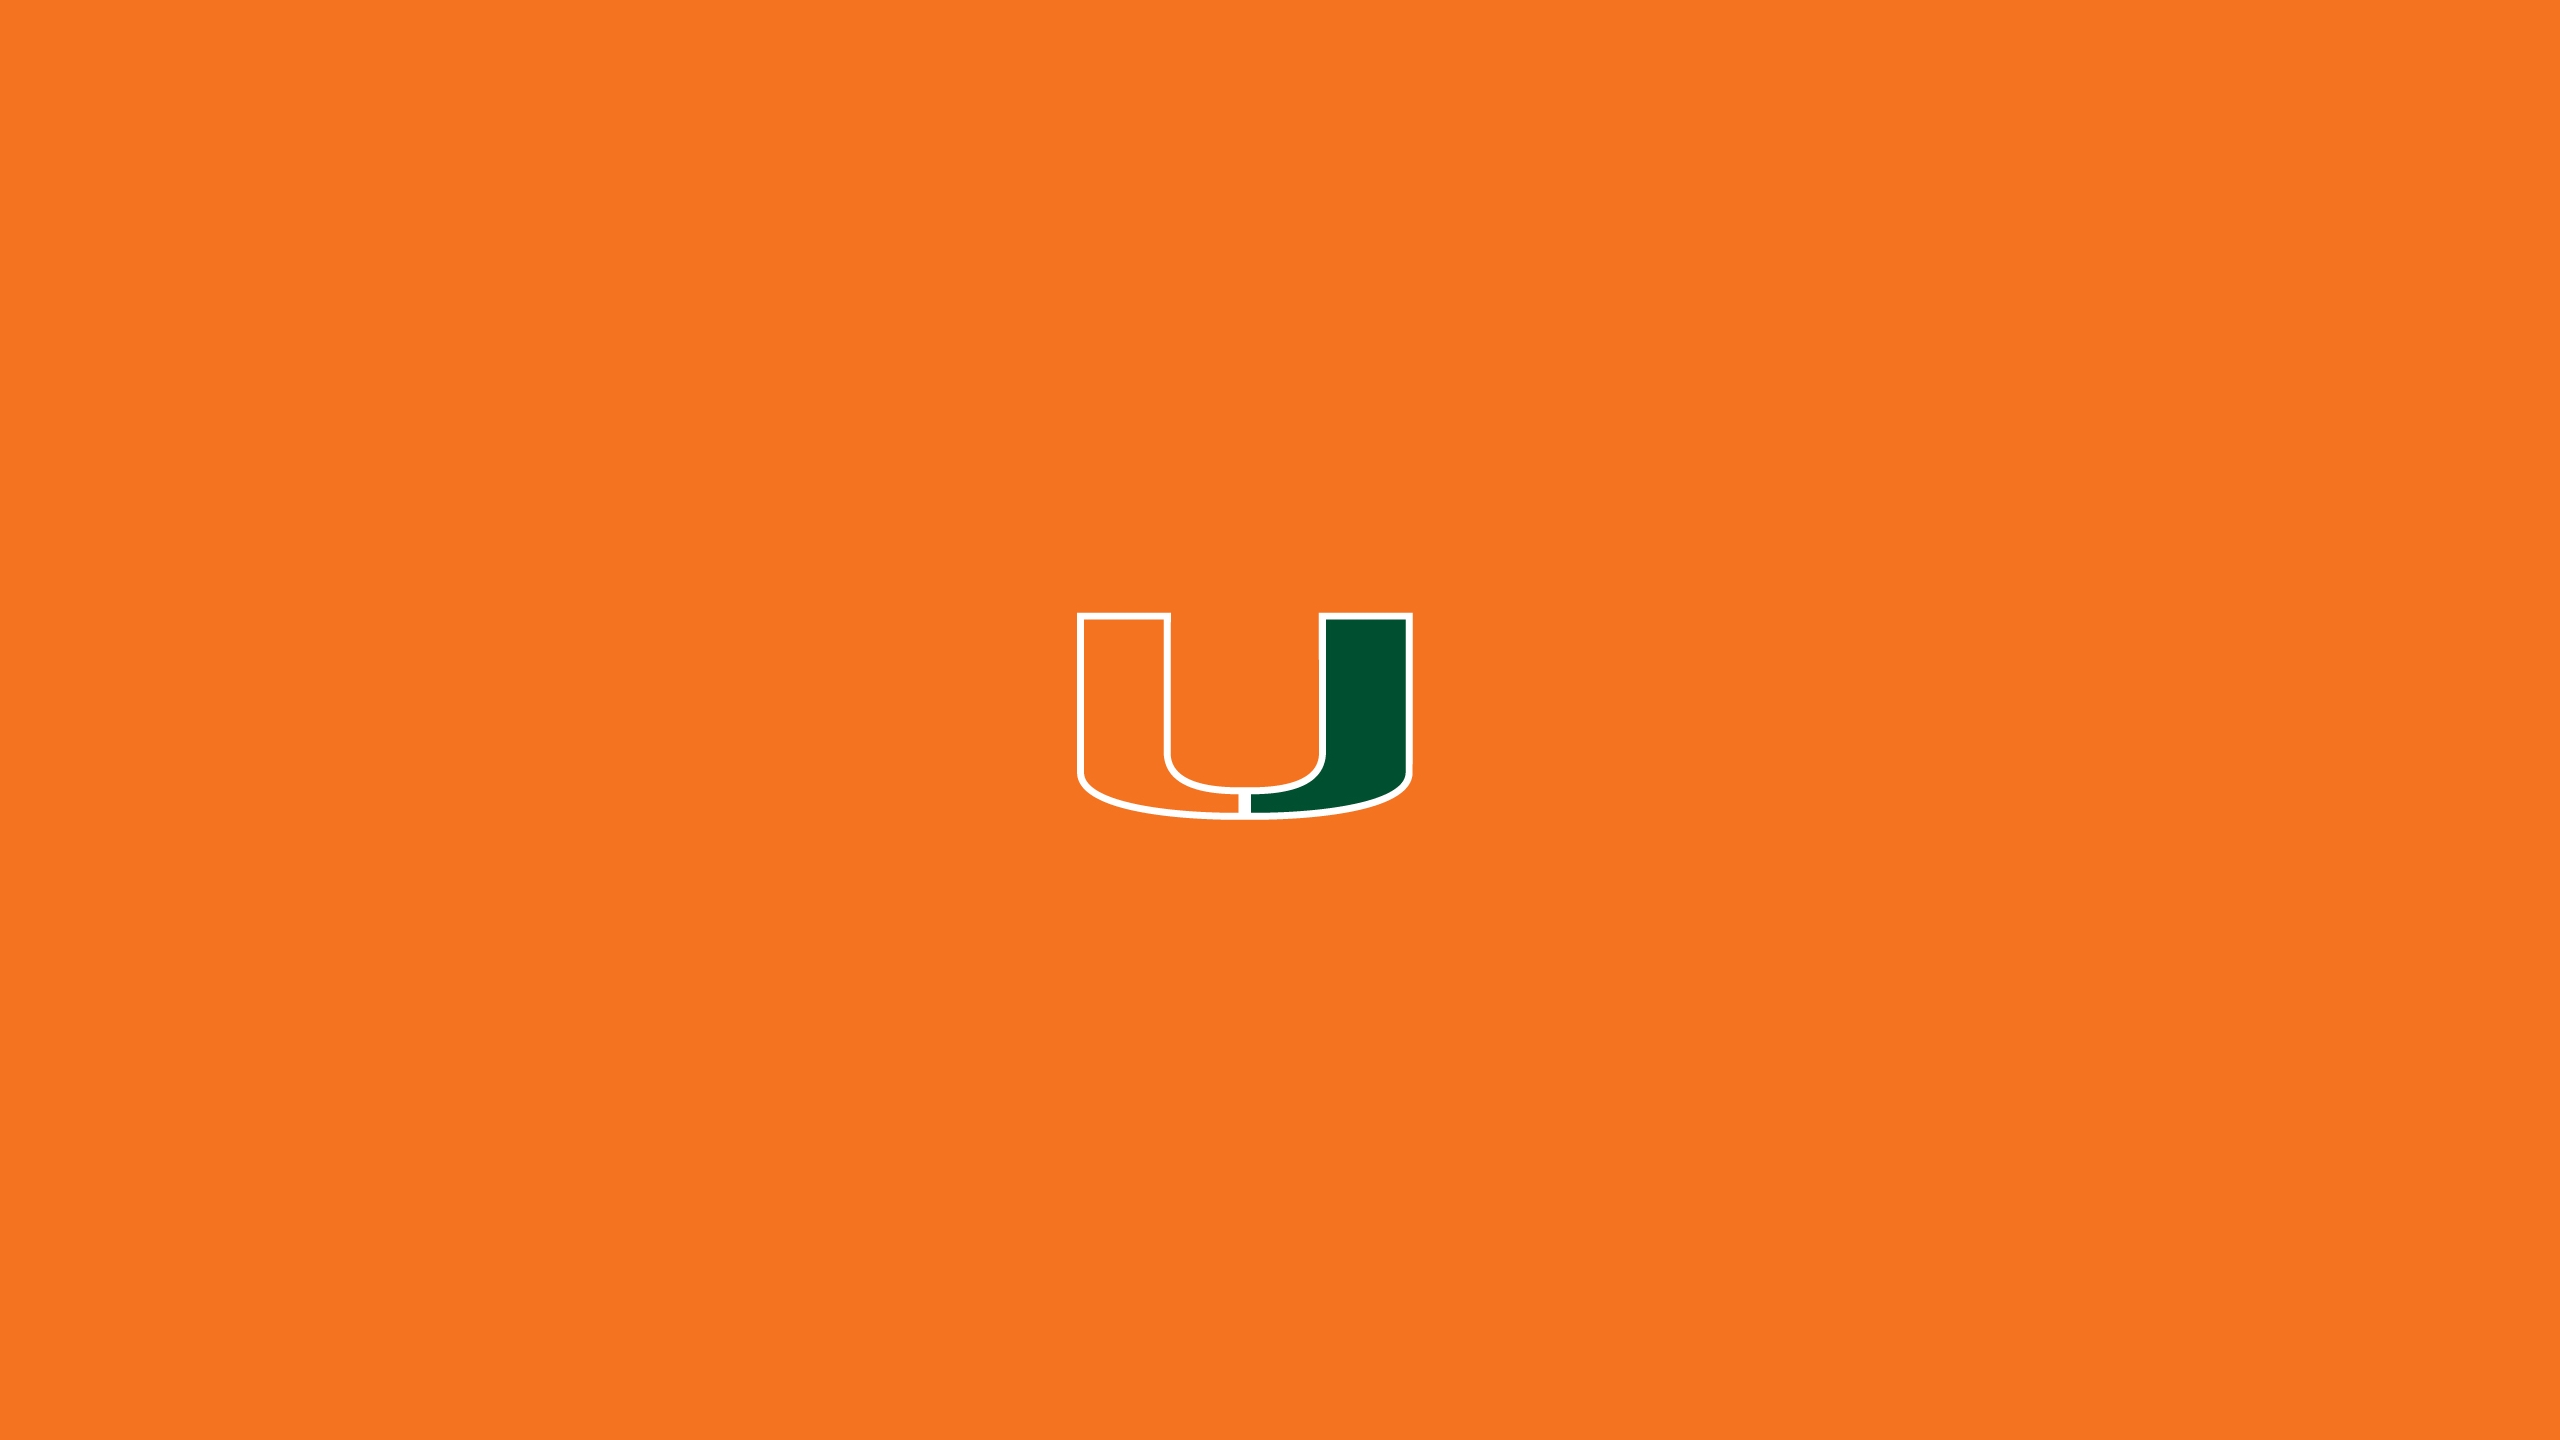 10 Best University Of Miami Background FULL HD 1920×1080 For PC Background